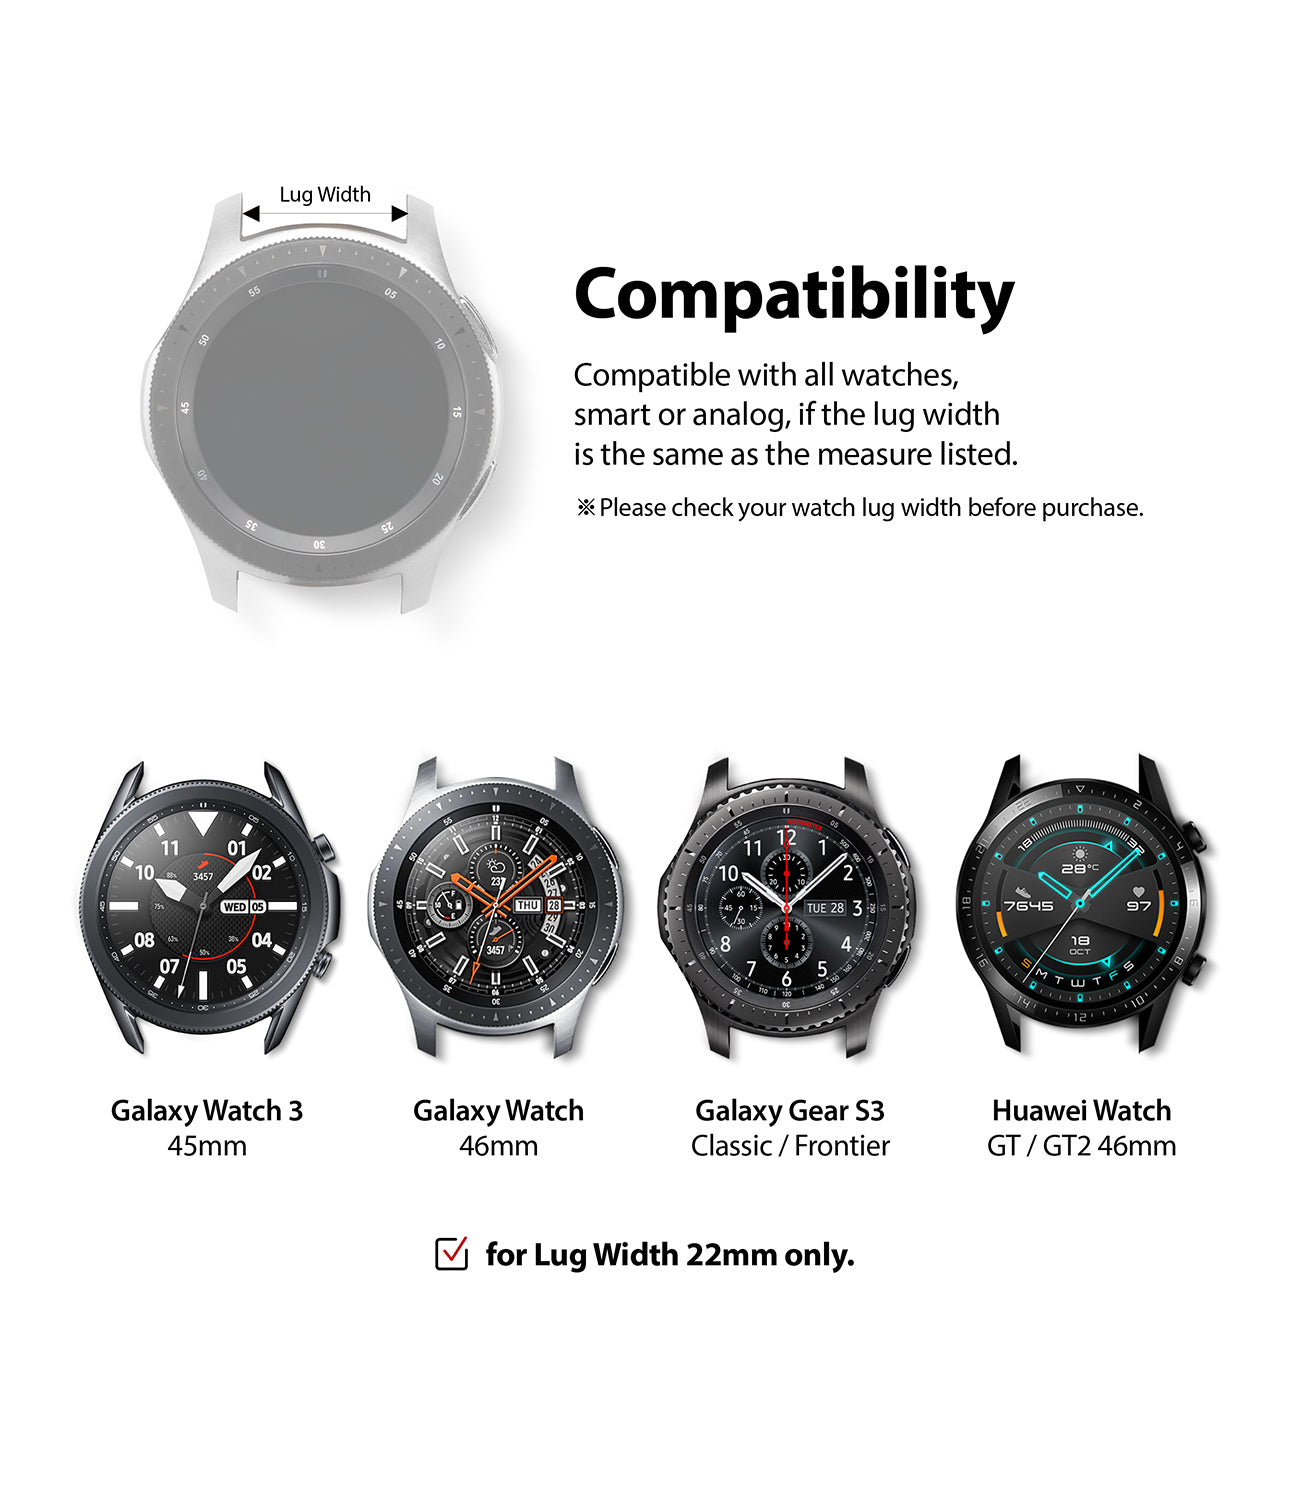 compatible with galaxy watch 3 45mm, galaxy watch 46mm, galaxy gear s3 classic & frontier, huawei watch gt / gt2 46mm